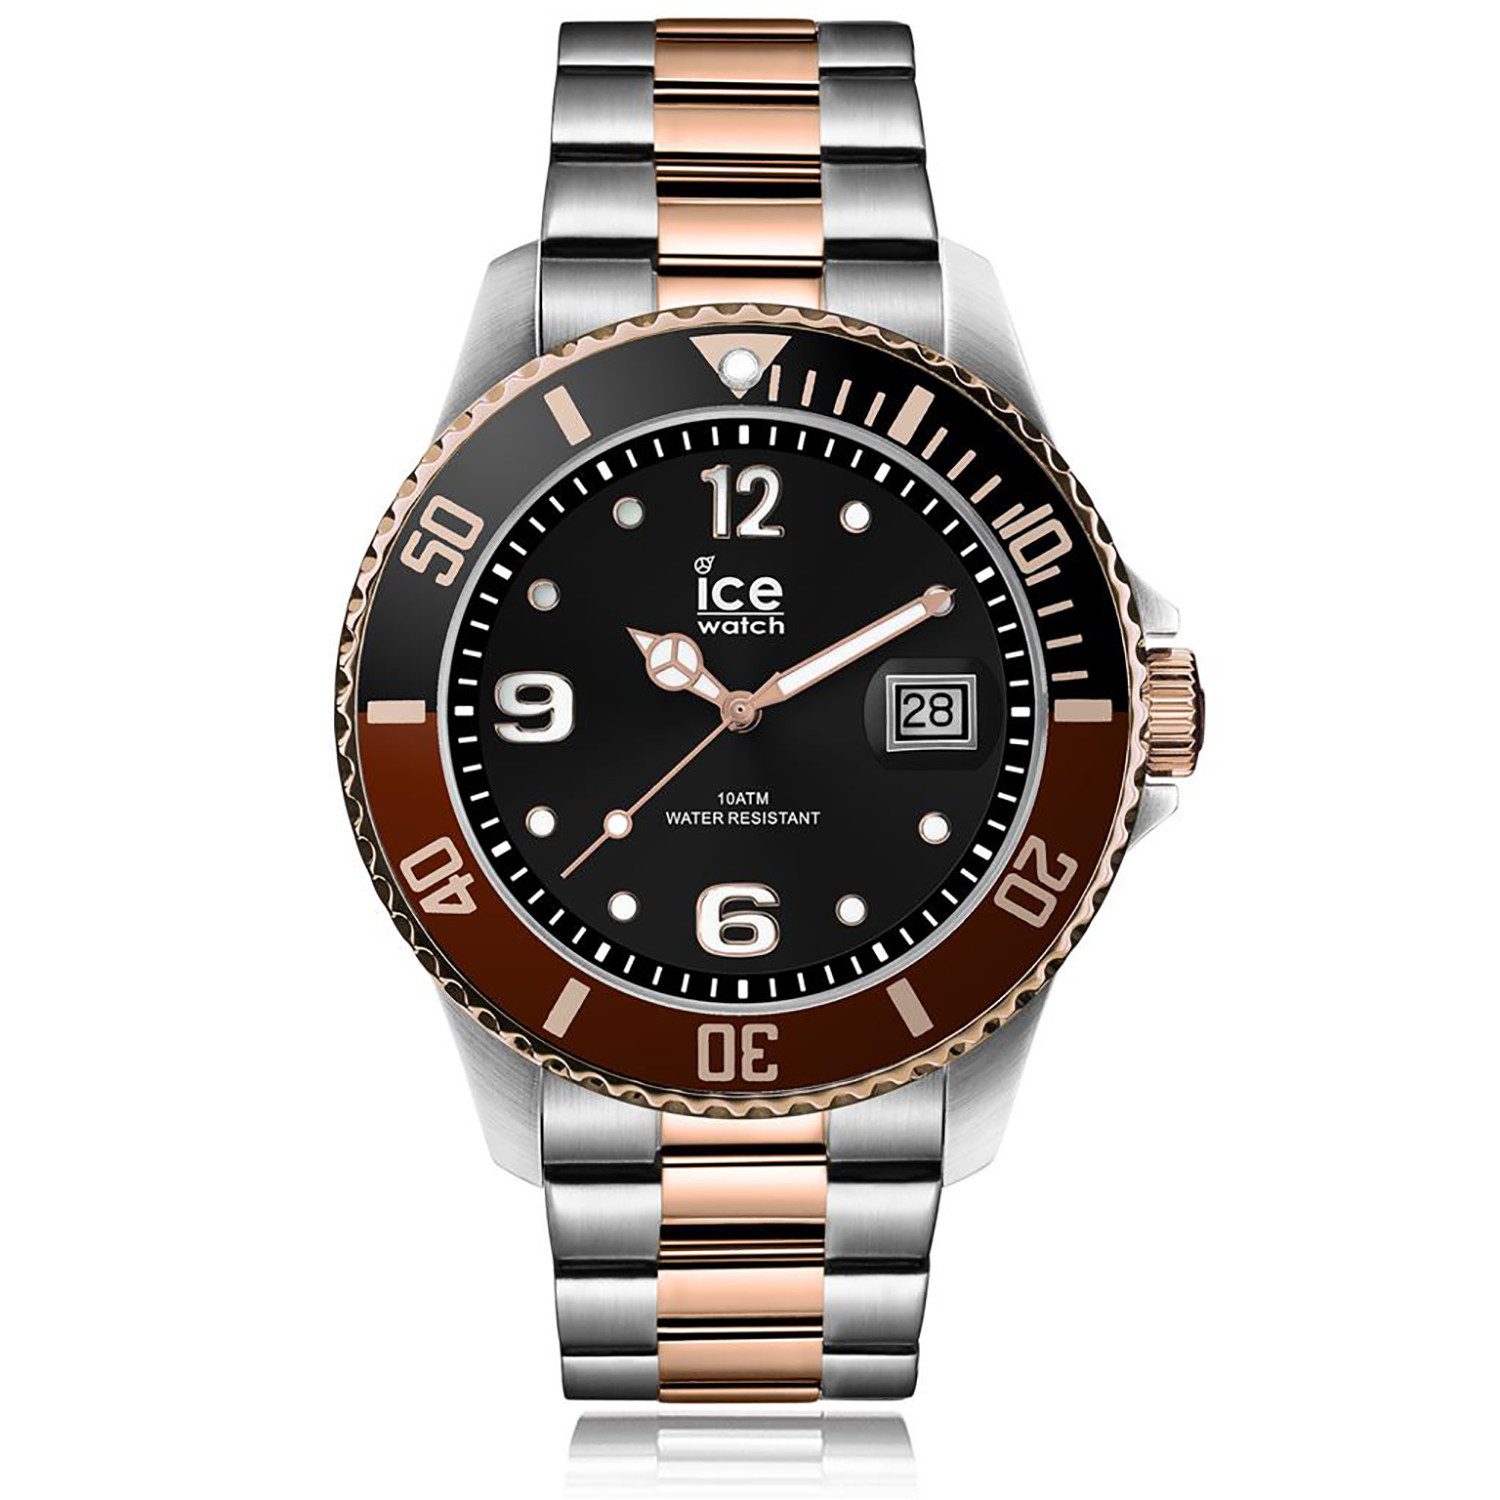 Montre Ice Watch Ice Steel Chic silver rose-gold
Large